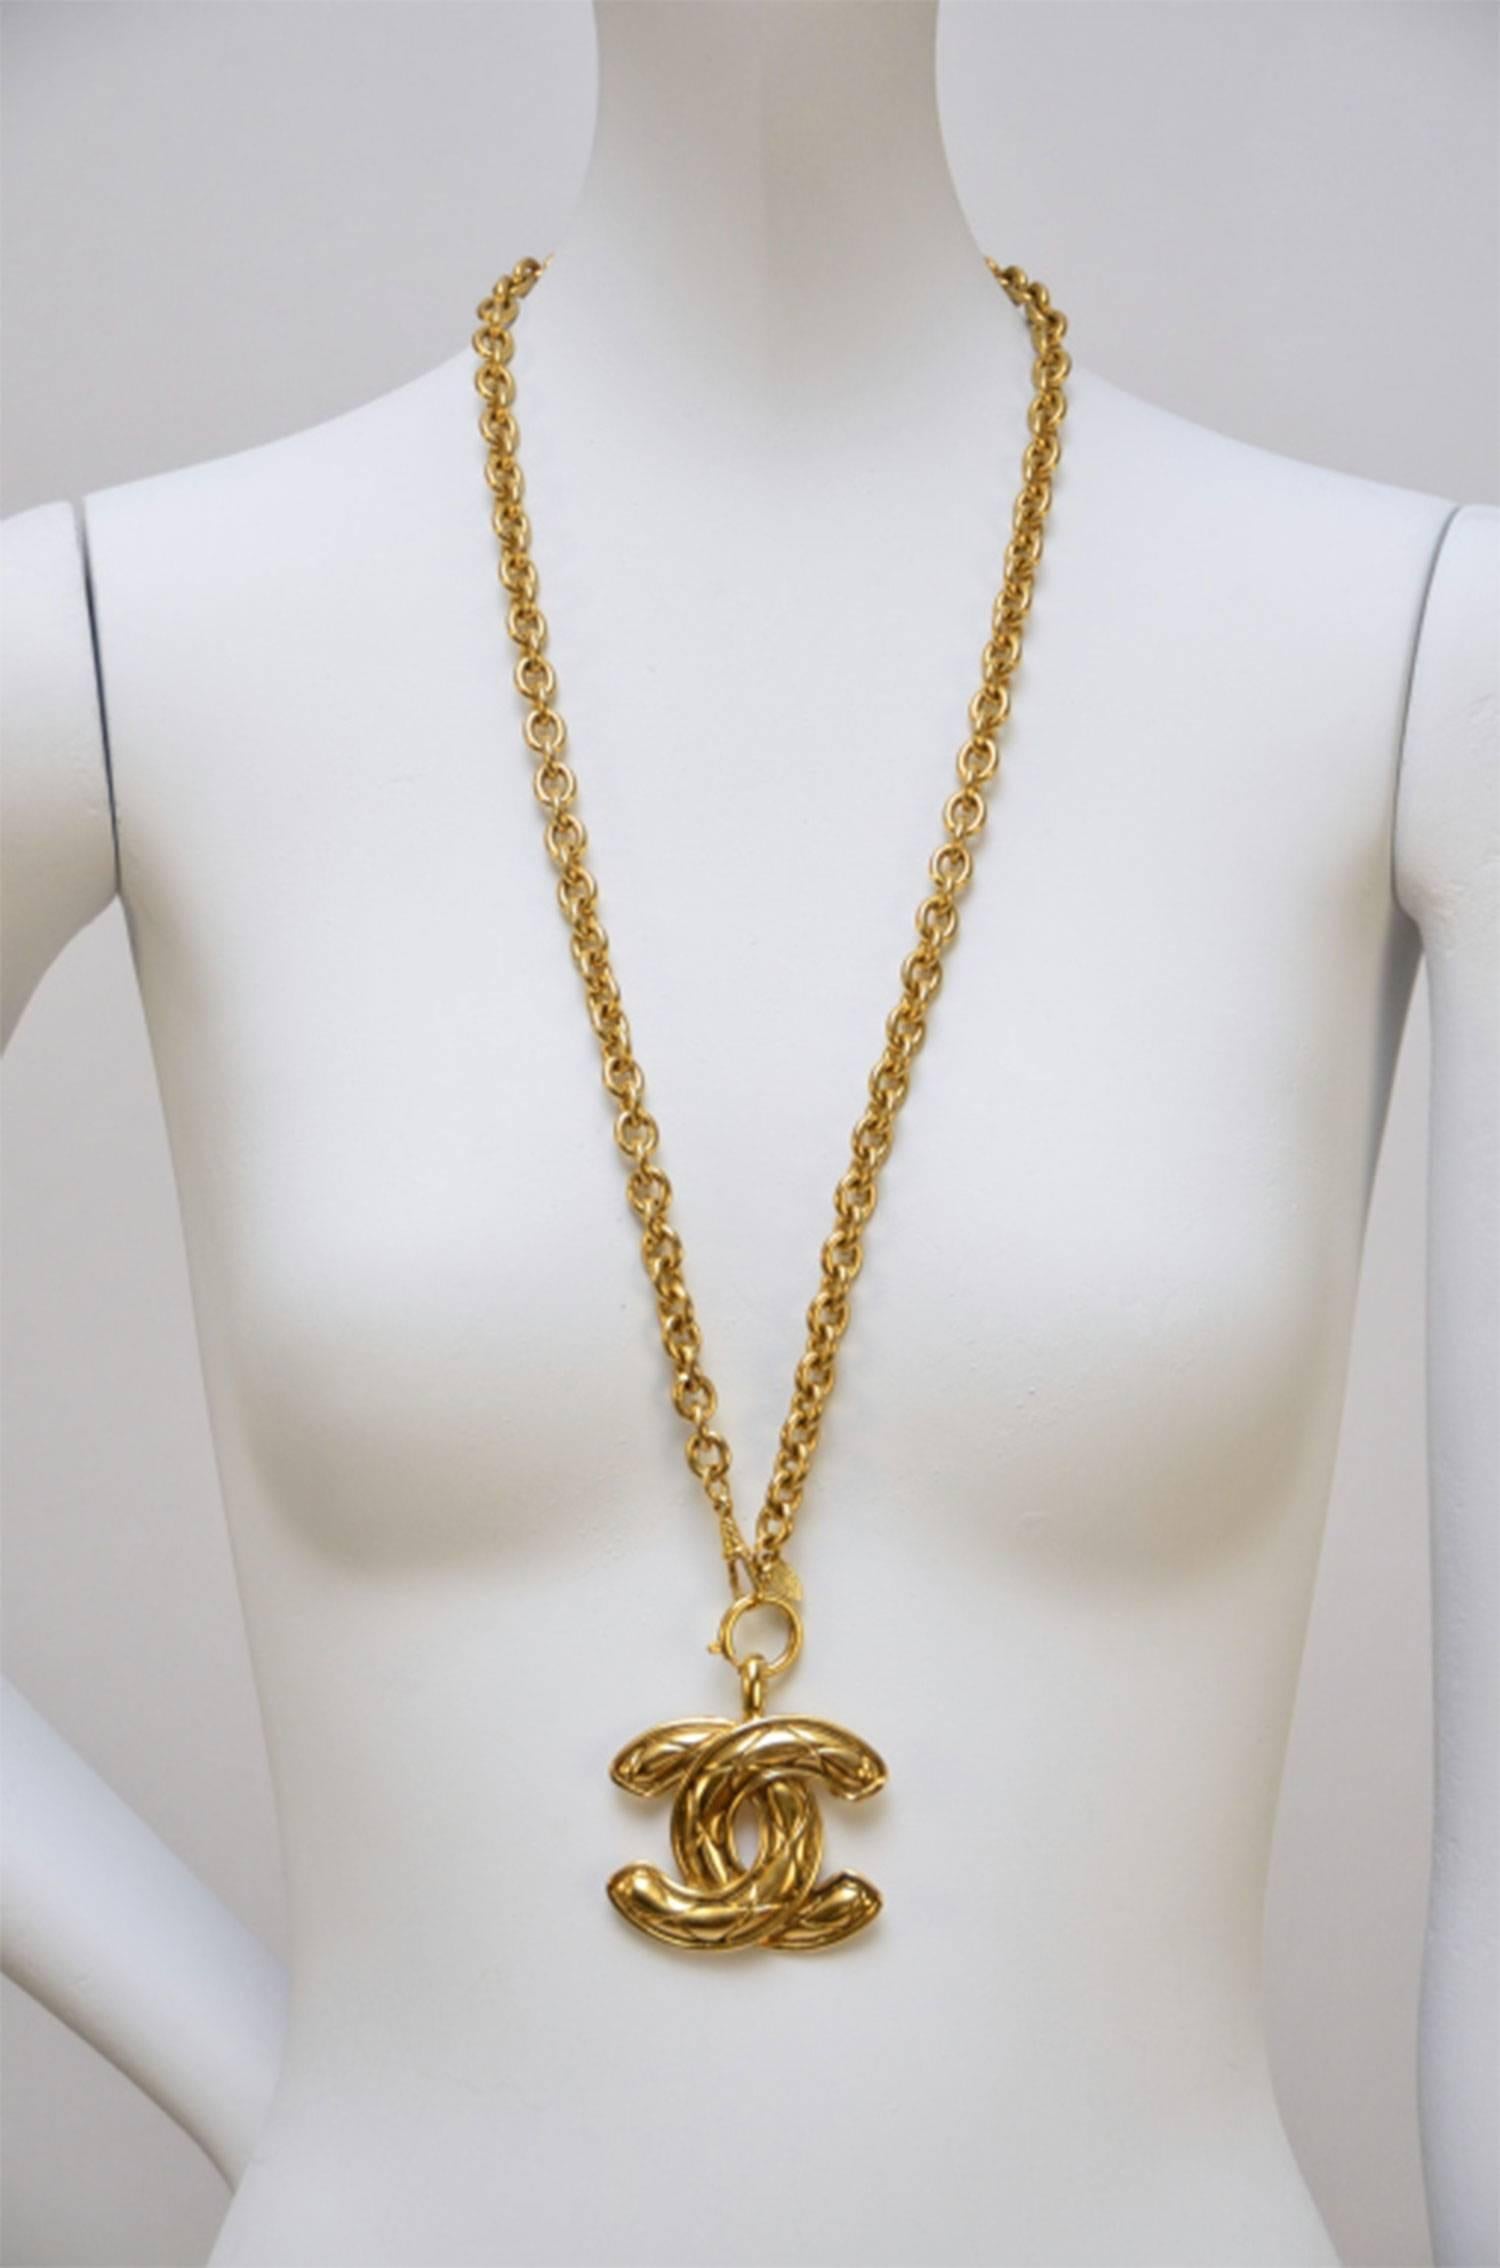 Chanel jumbo necklace.Excellent vintage condition and gold plating.
Total chain length:30